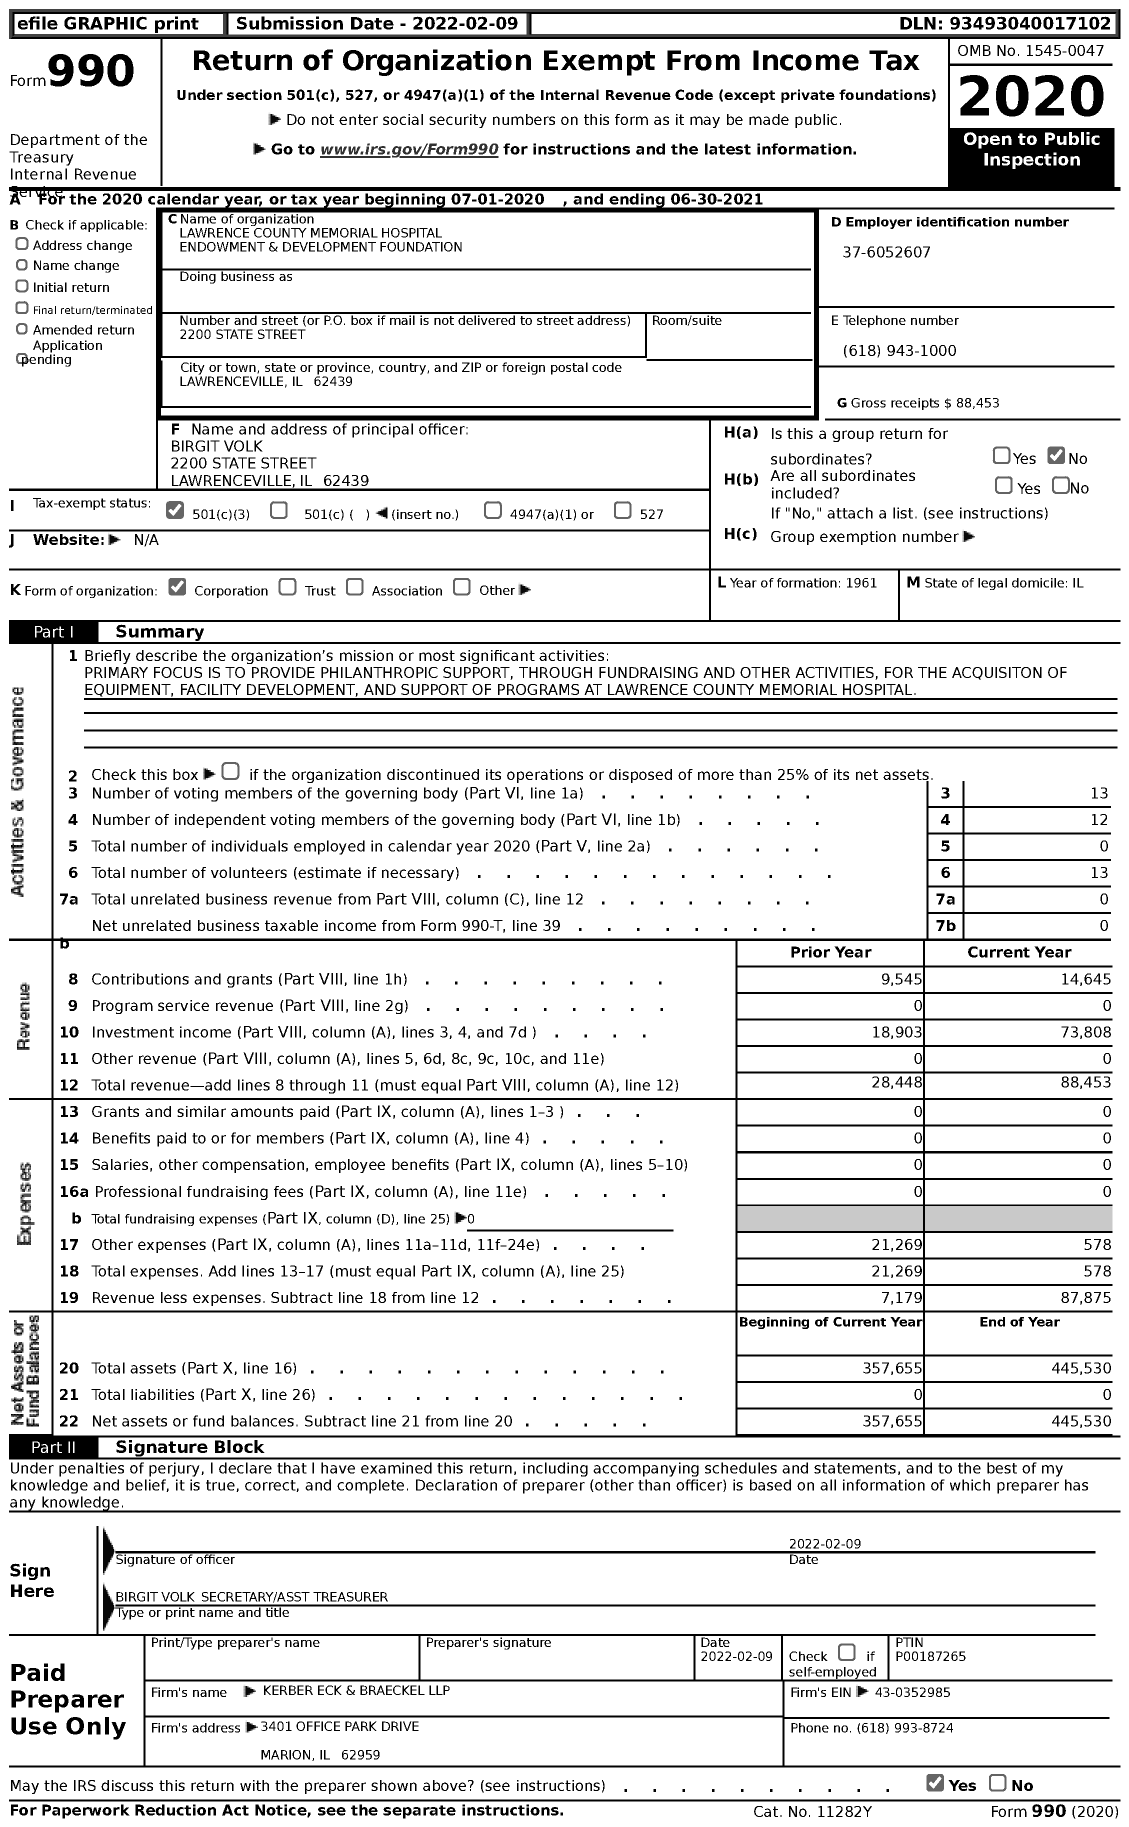 Image of first page of 2020 Form 990 for Lawrence County Memorial Hospital Endowment and Development Foundation